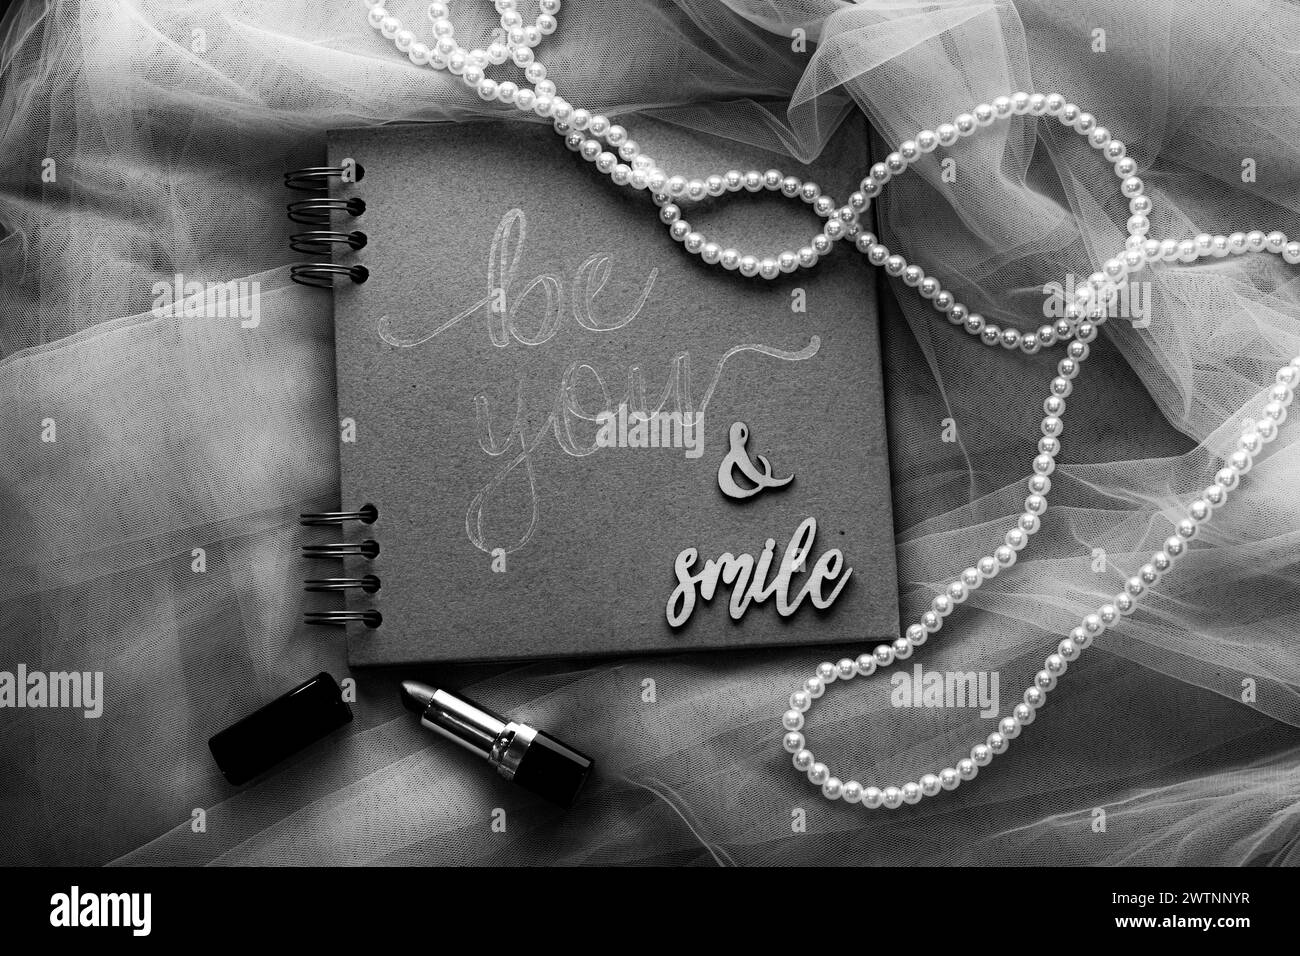 notepad with message and pearls Stock Photo